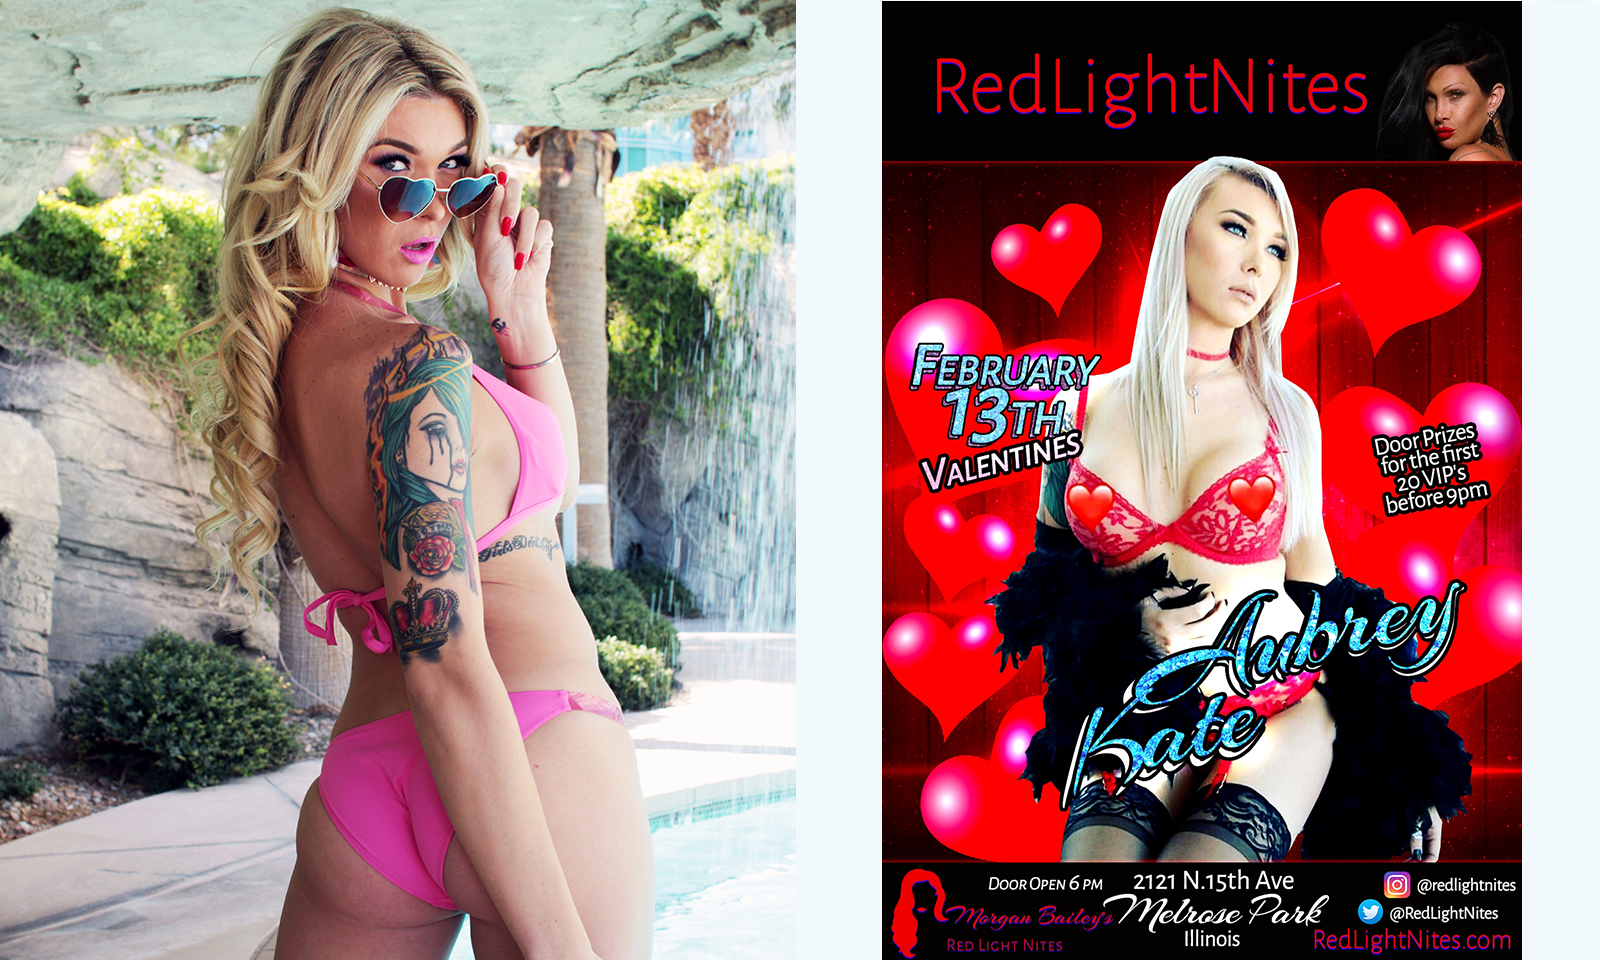 Aubrey Kate at Red Light Nites in Illinois for Valentine’s Day